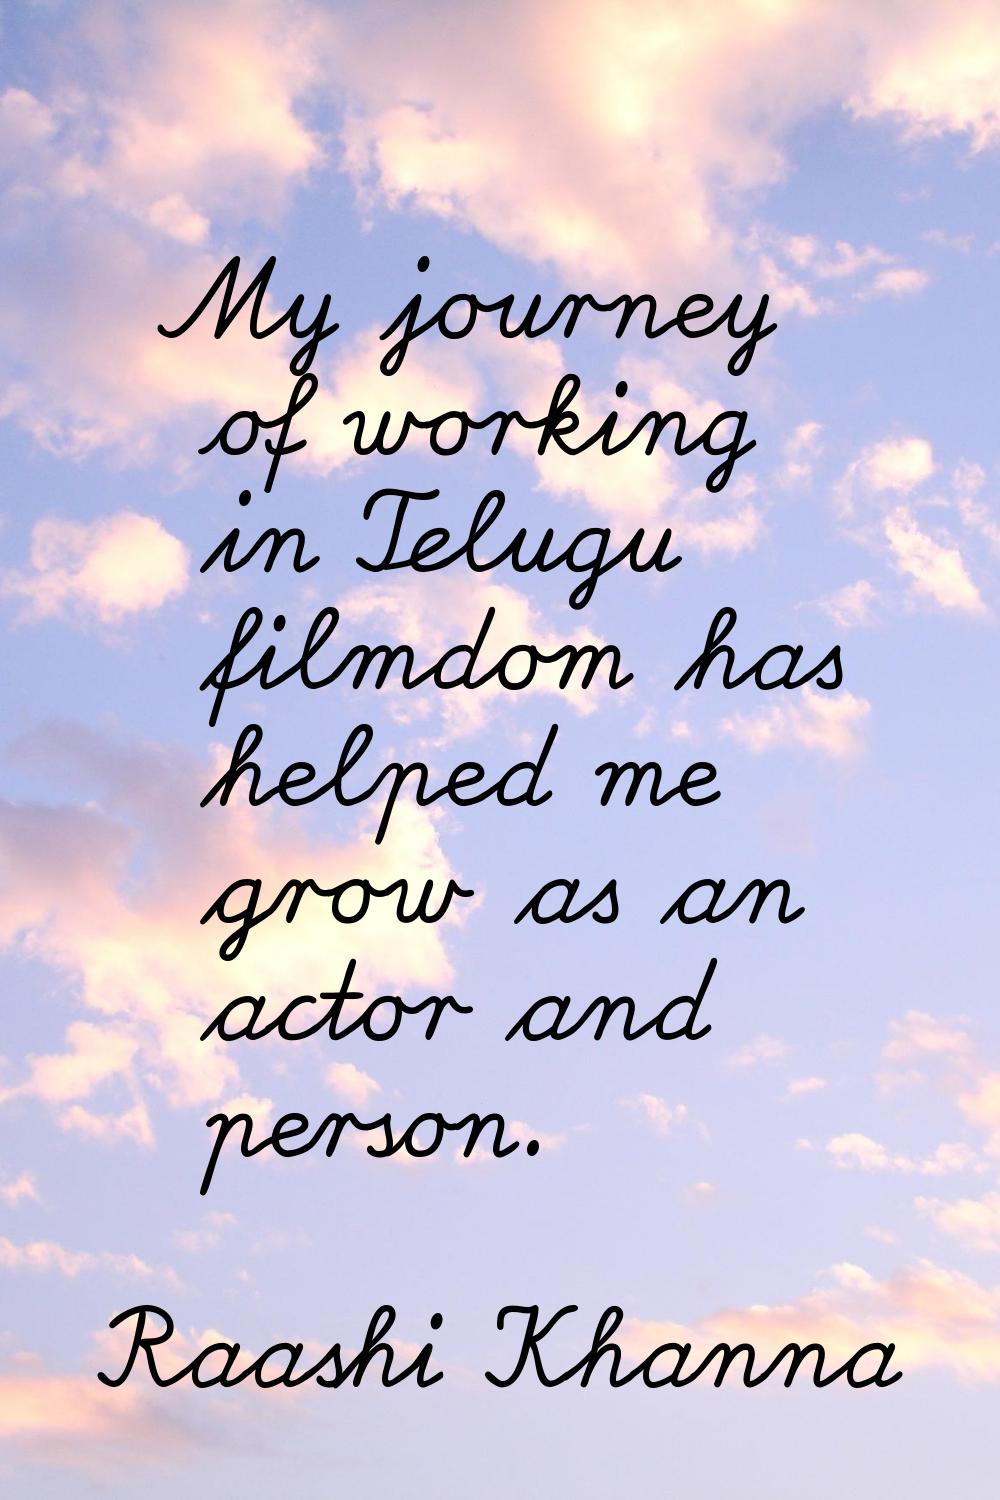 My journey of working in Telugu filmdom has helped me grow as an actor and person.